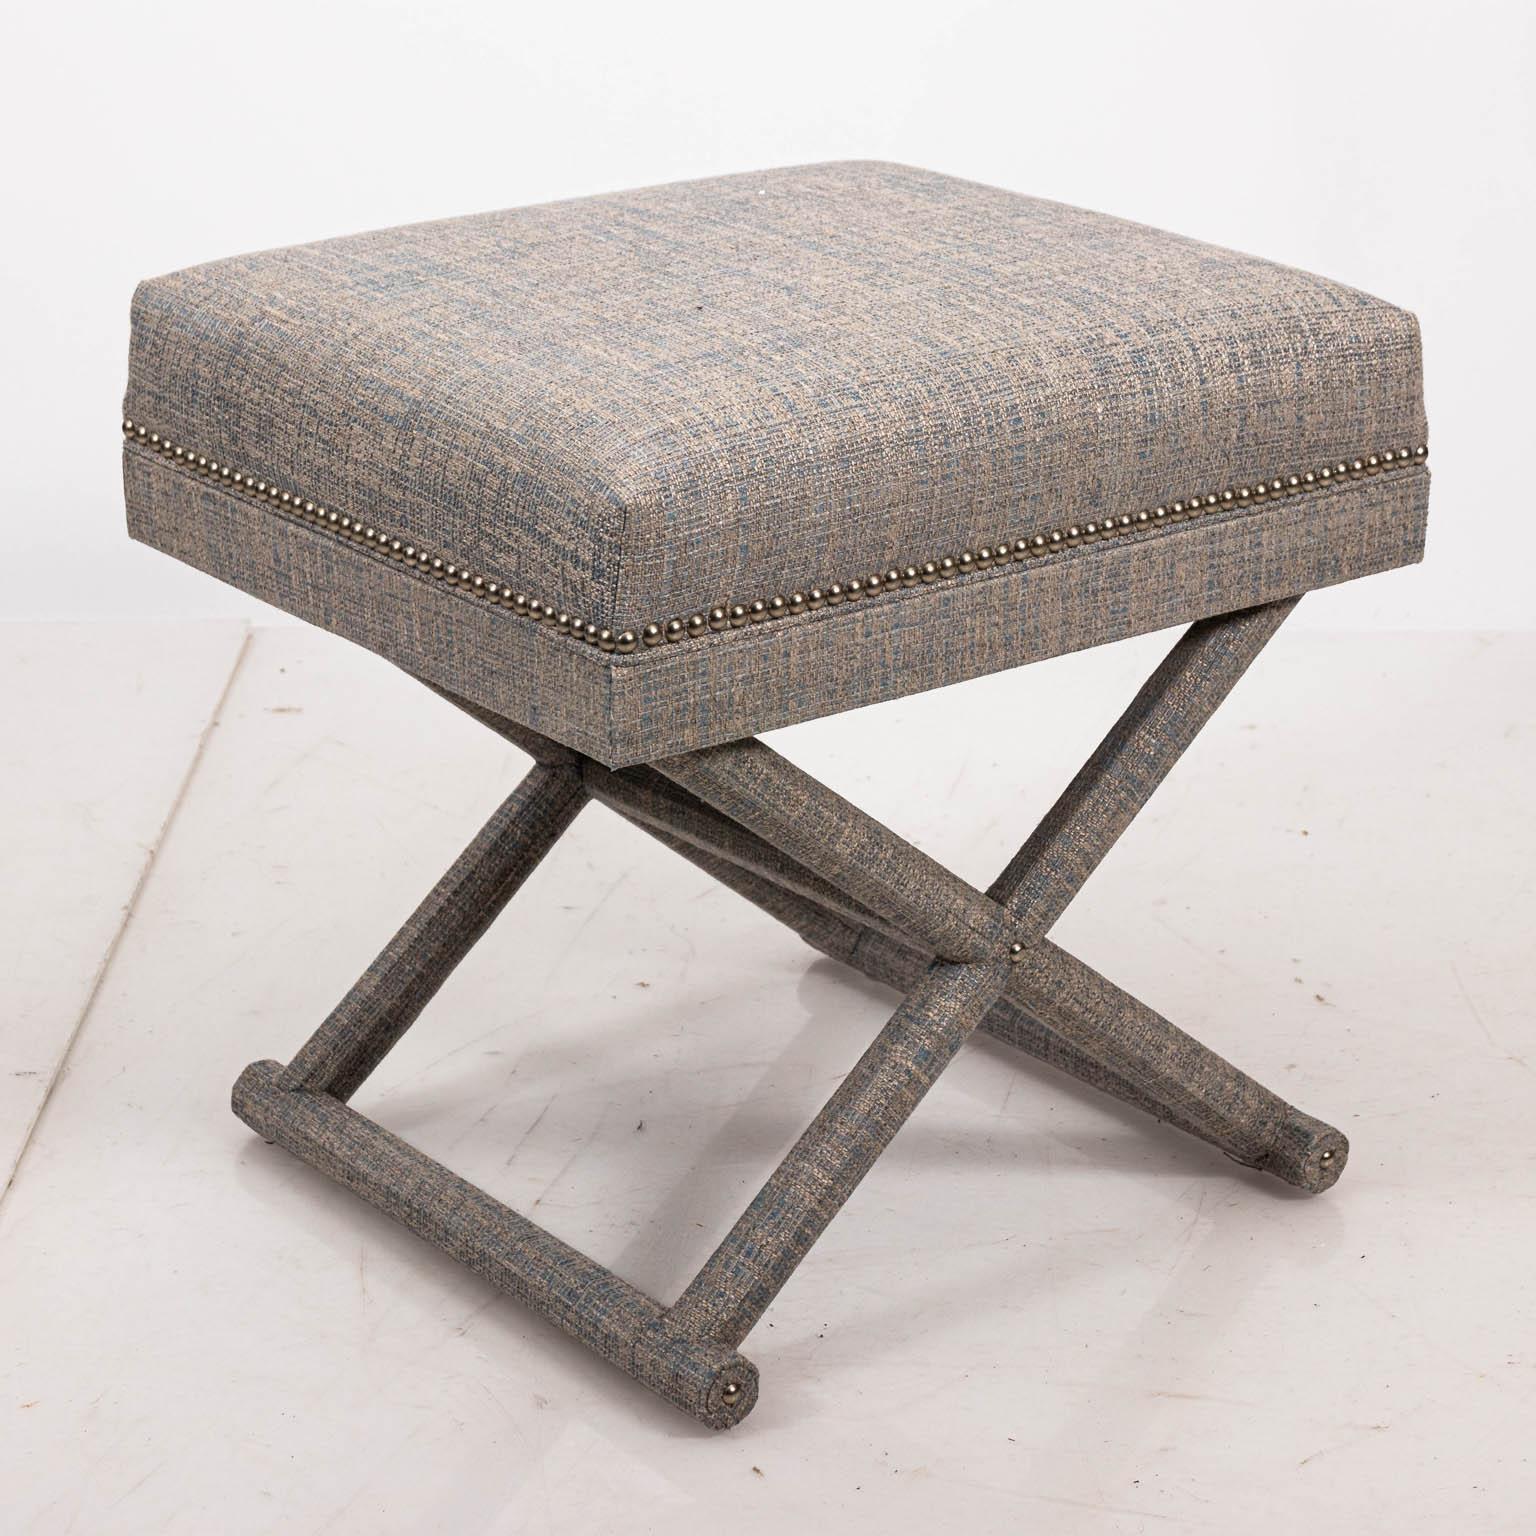 Upholstered X-frame bench with fabric cushion and metal nail head trim. Please note of wear consistent with age.